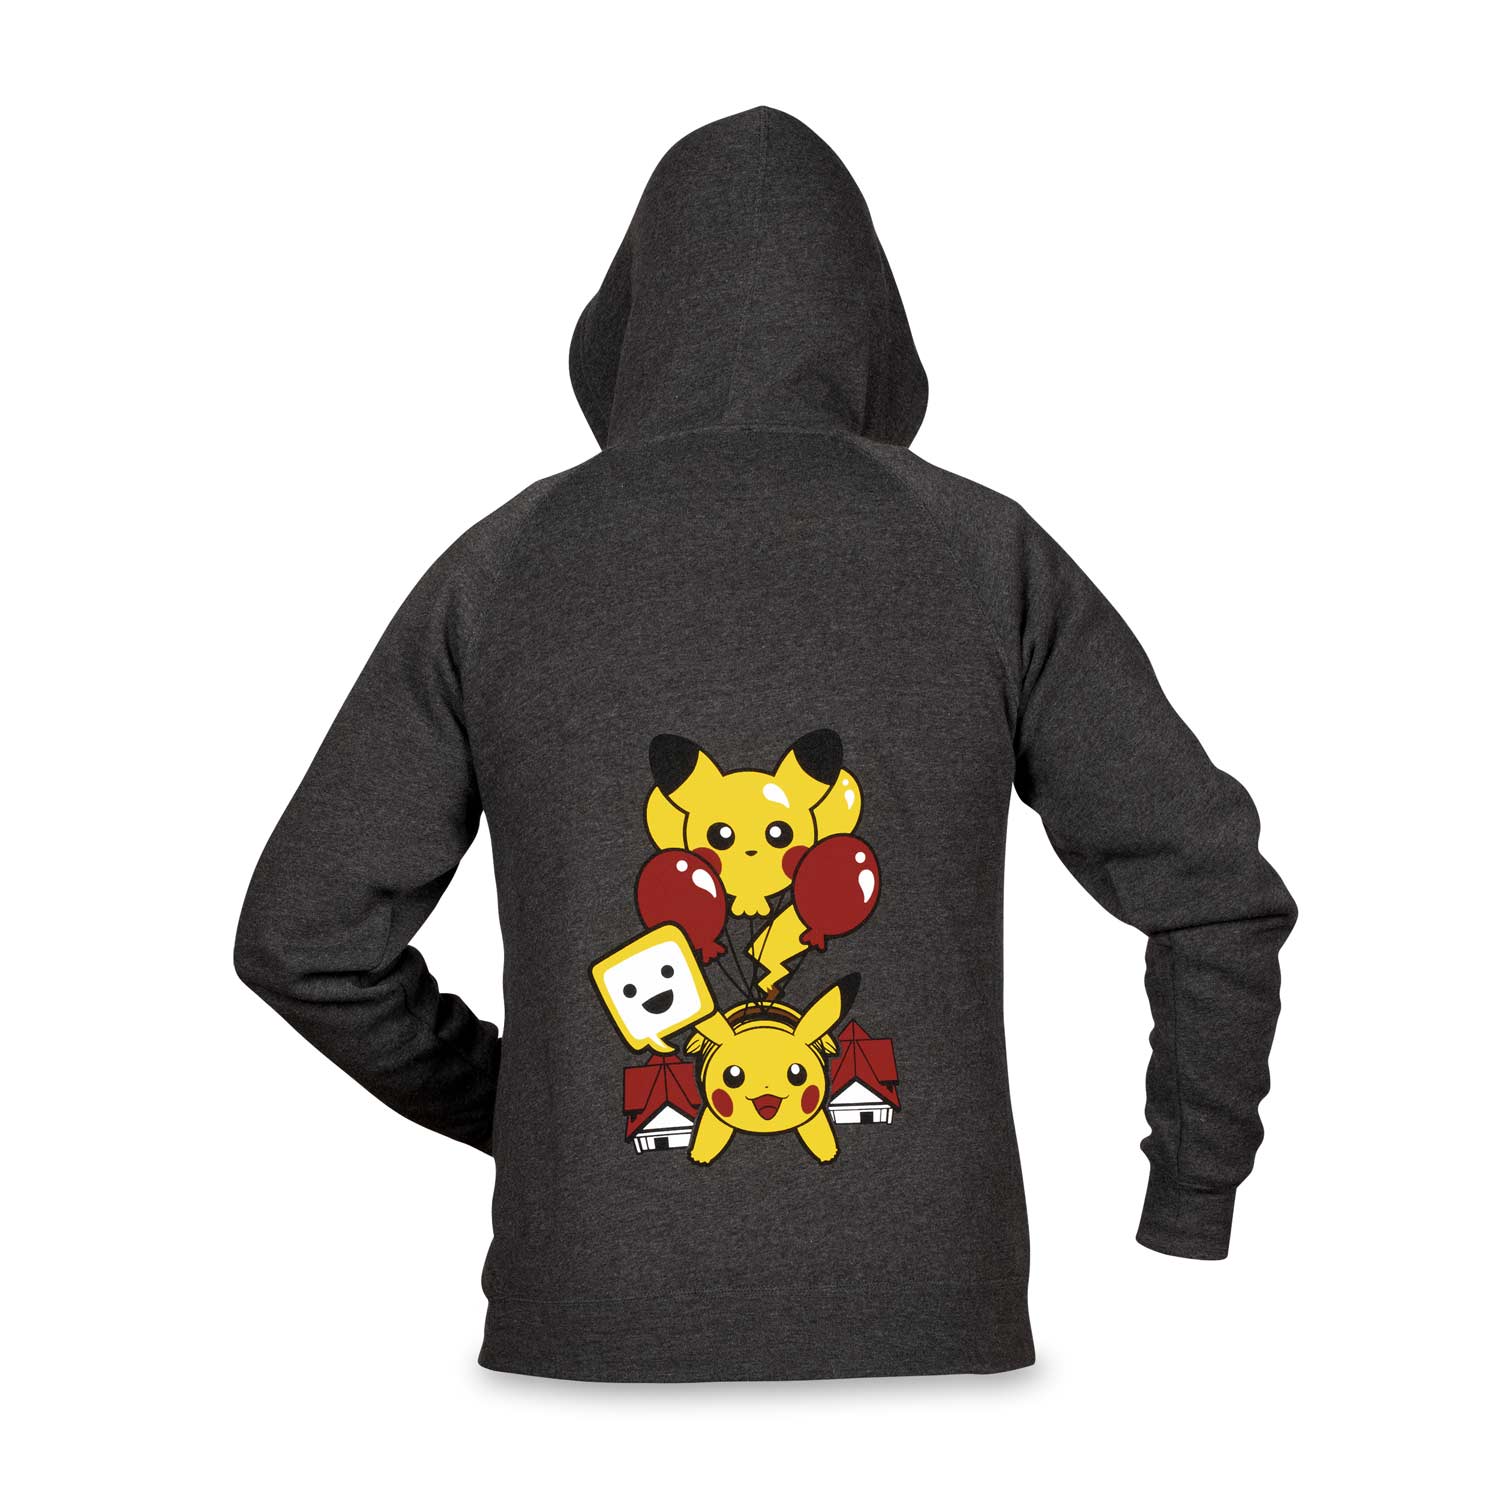 Exploring With Pikachu Fitted Hoodie Adult Pokémon Center Original